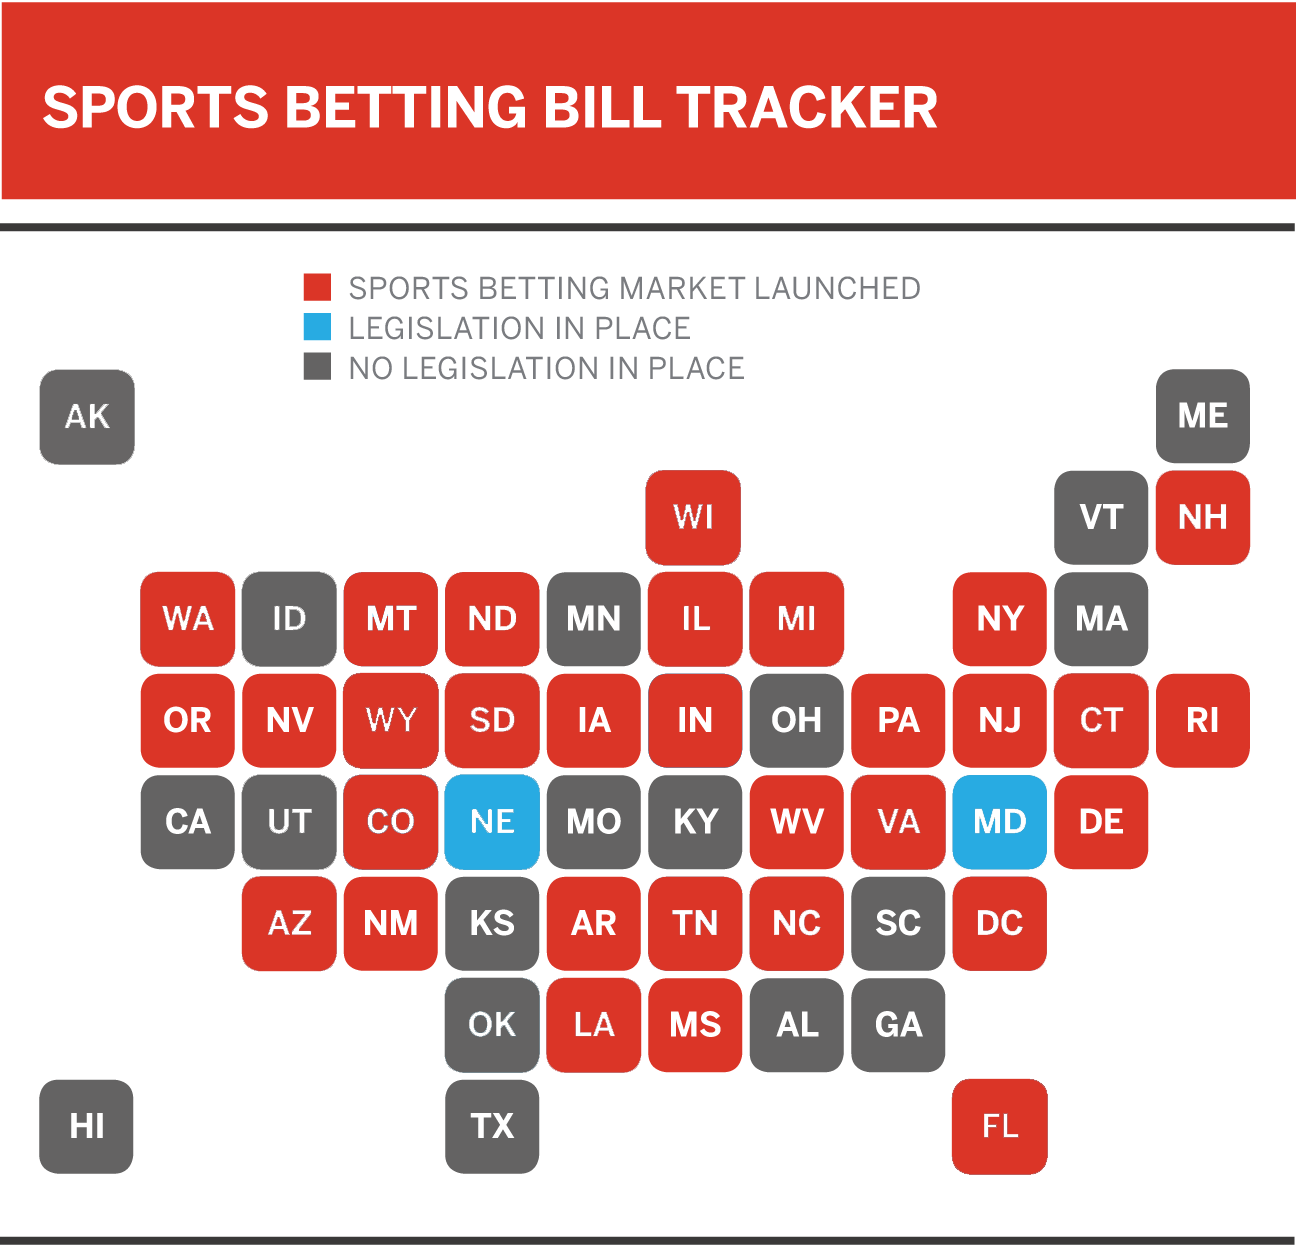 Applications for mobile sports betting licenses are open as the public comment period continues